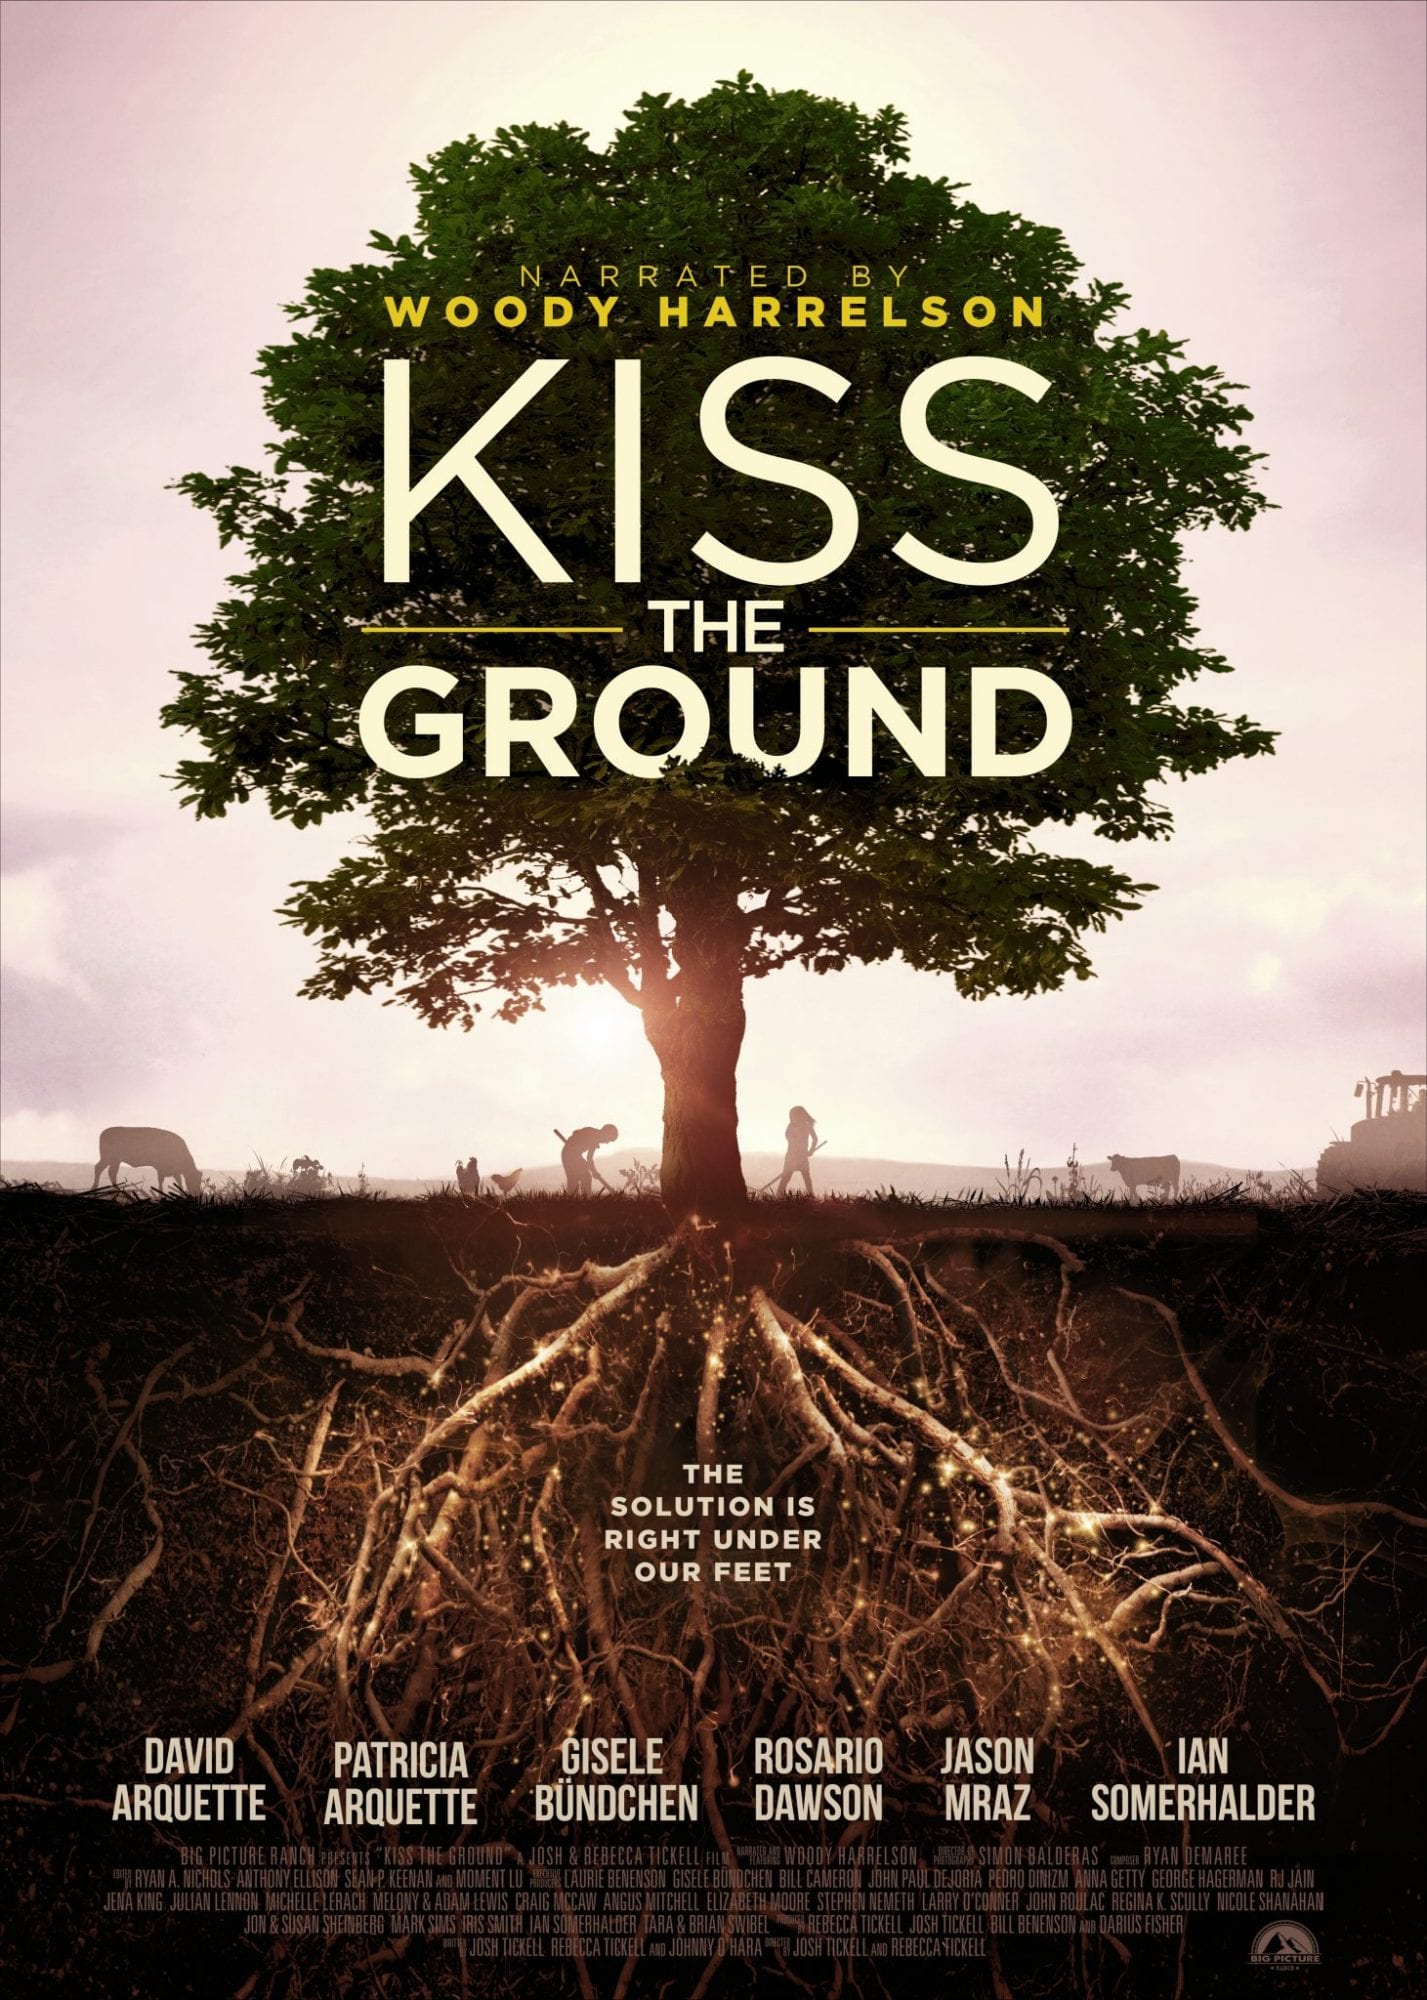 KISS-THE-GROUND-NEW-TREE-scaled-1